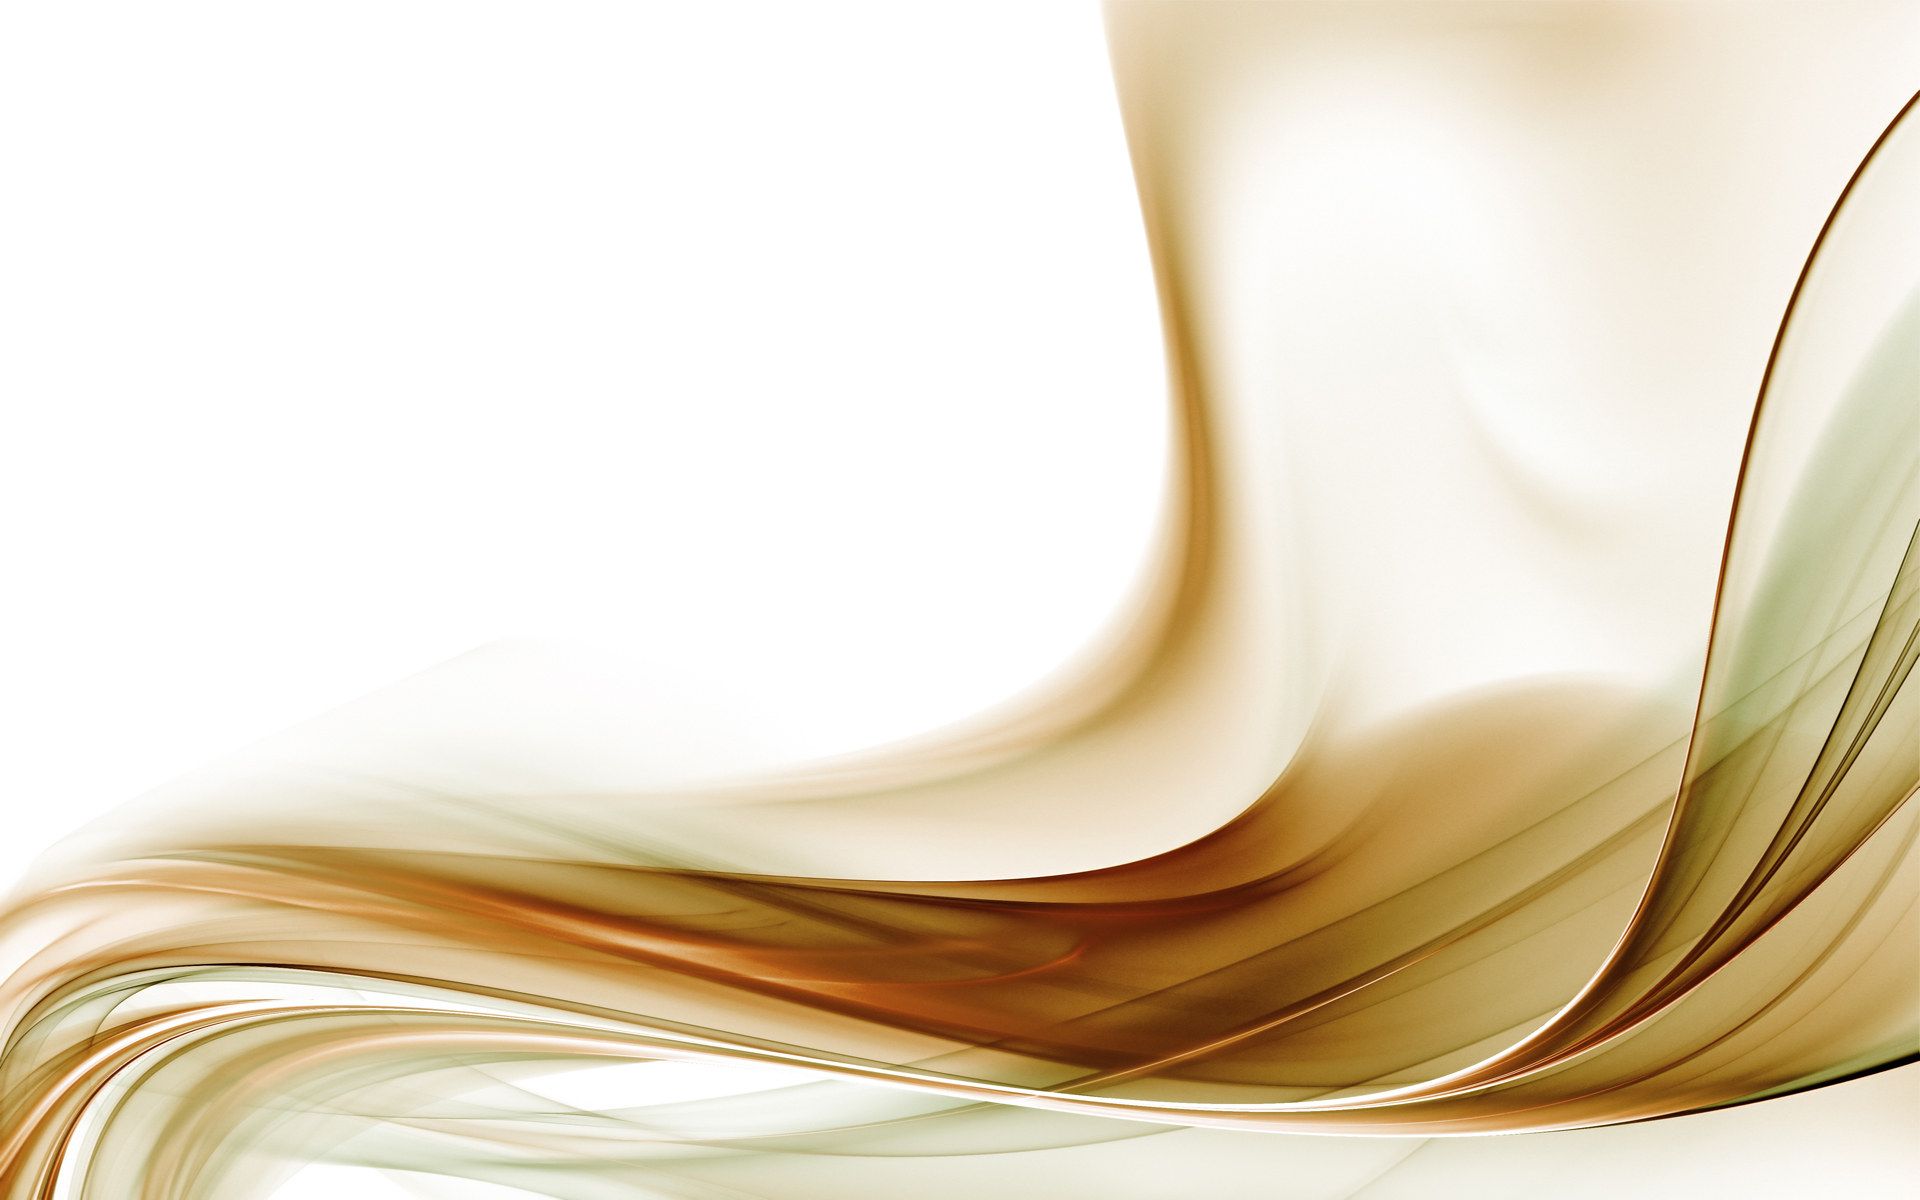 Abstract Glossy Wallpapers